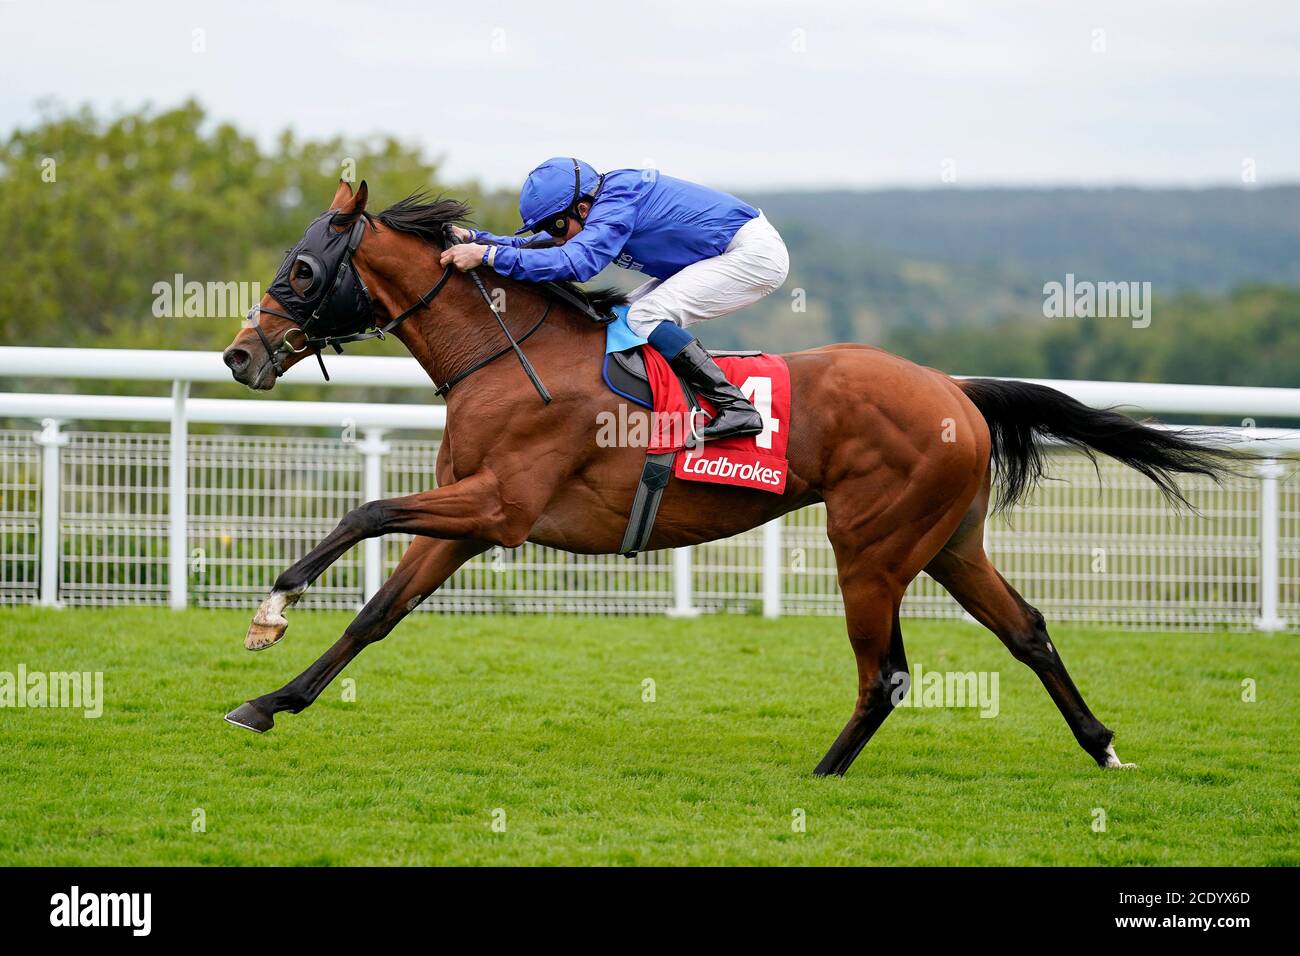 Native Tribe ridden by jockey William Buick wins The Ladbrokes Get Your Daily Odds Boost Handicap at Goodwood Racecourse, Chichester. Stock Photo